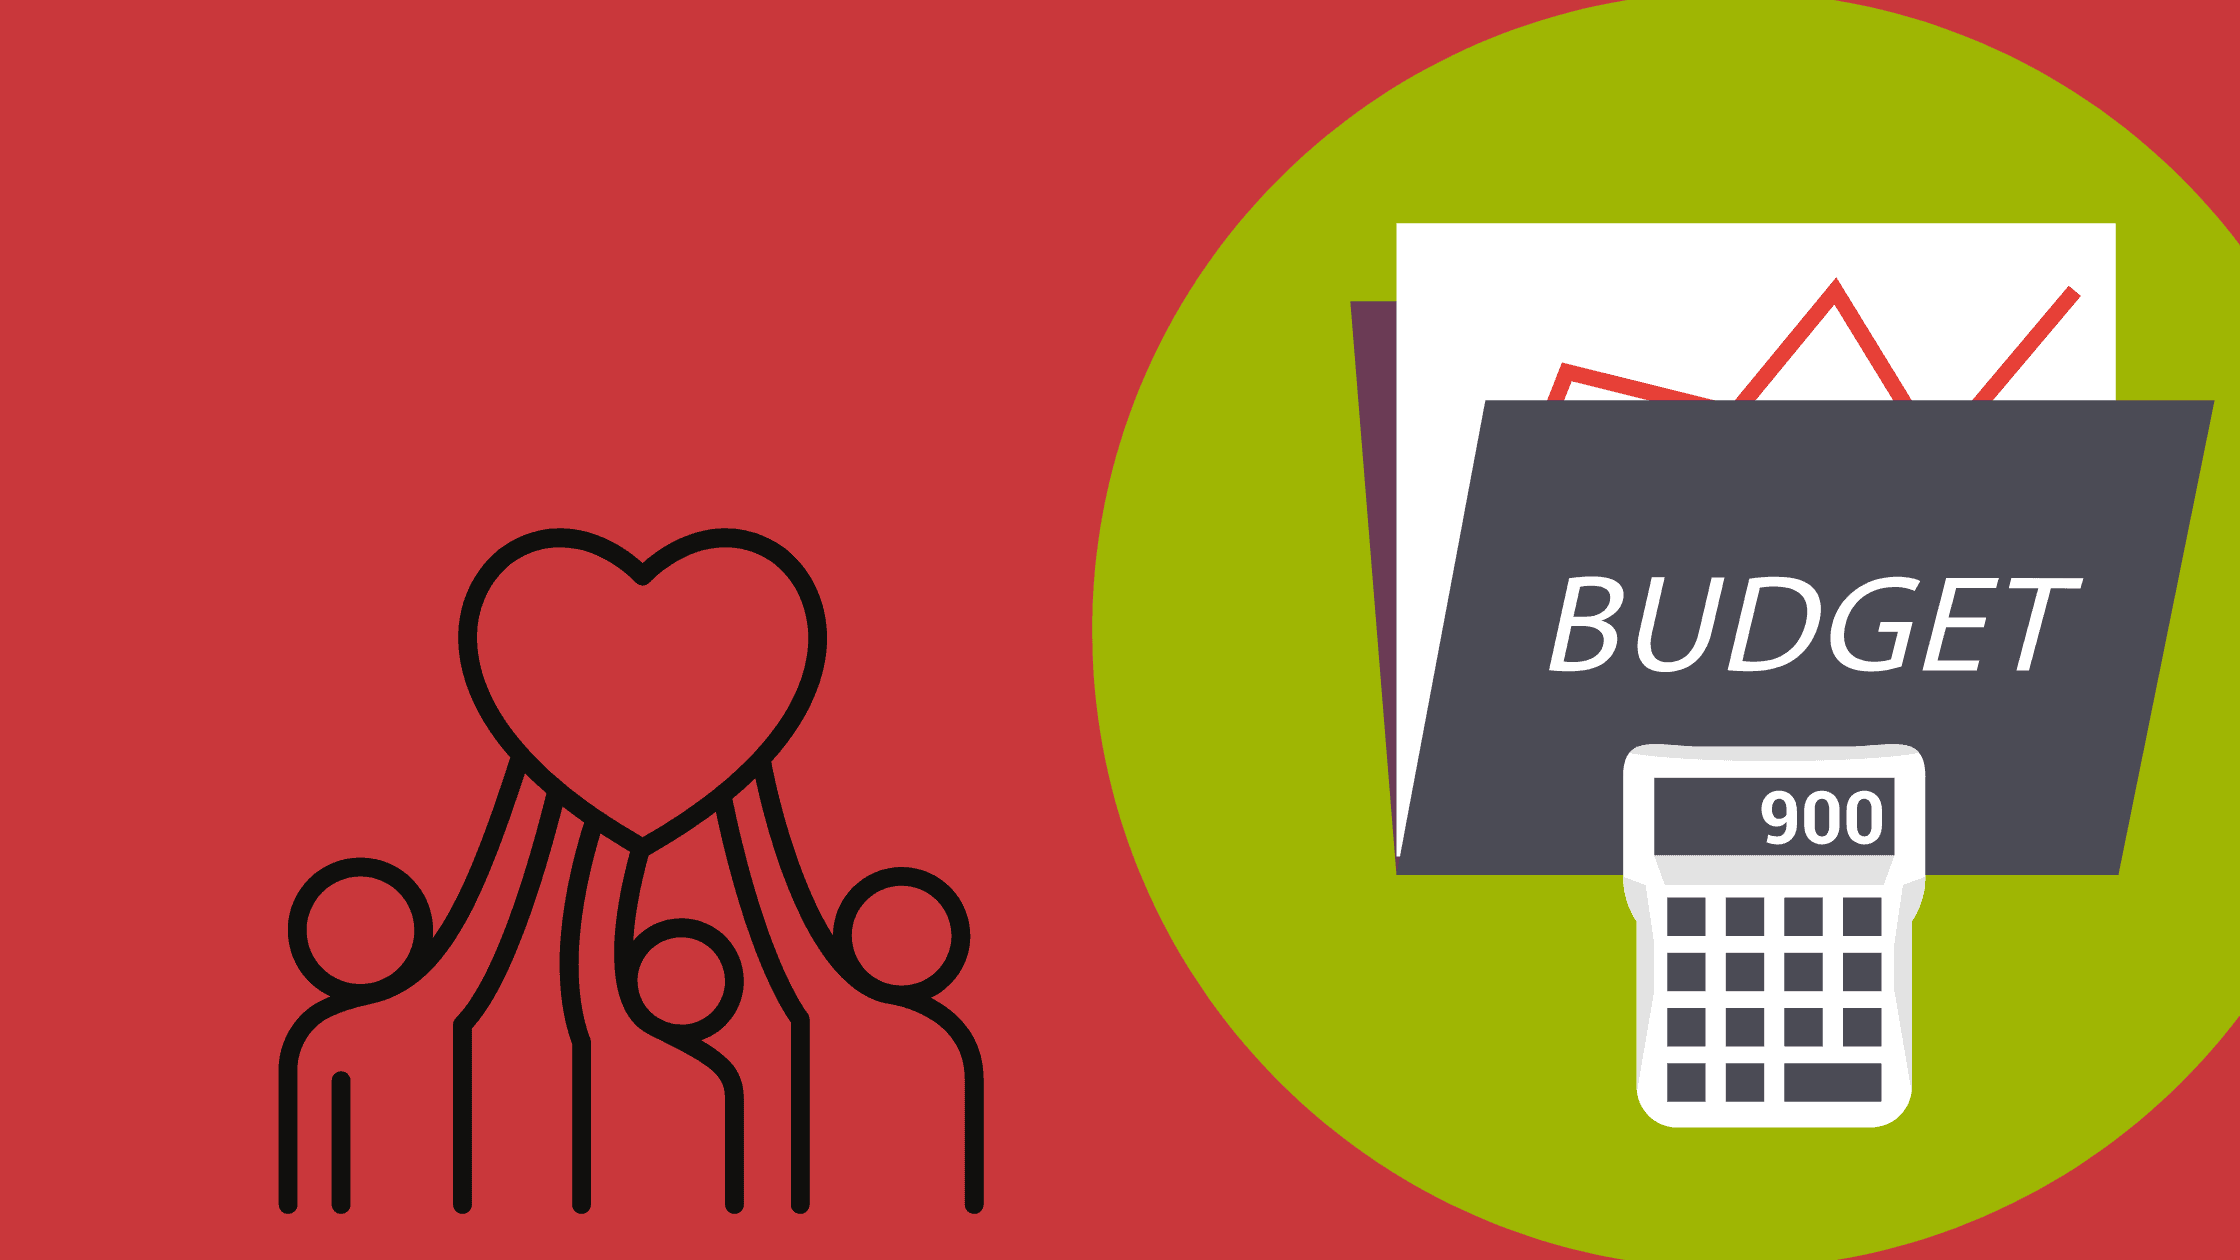 A folder with the word BUDGET and a calculator are placed in a circular lime-green frame on the right. On the left are three people icons lifting a heart against a brick-red background.